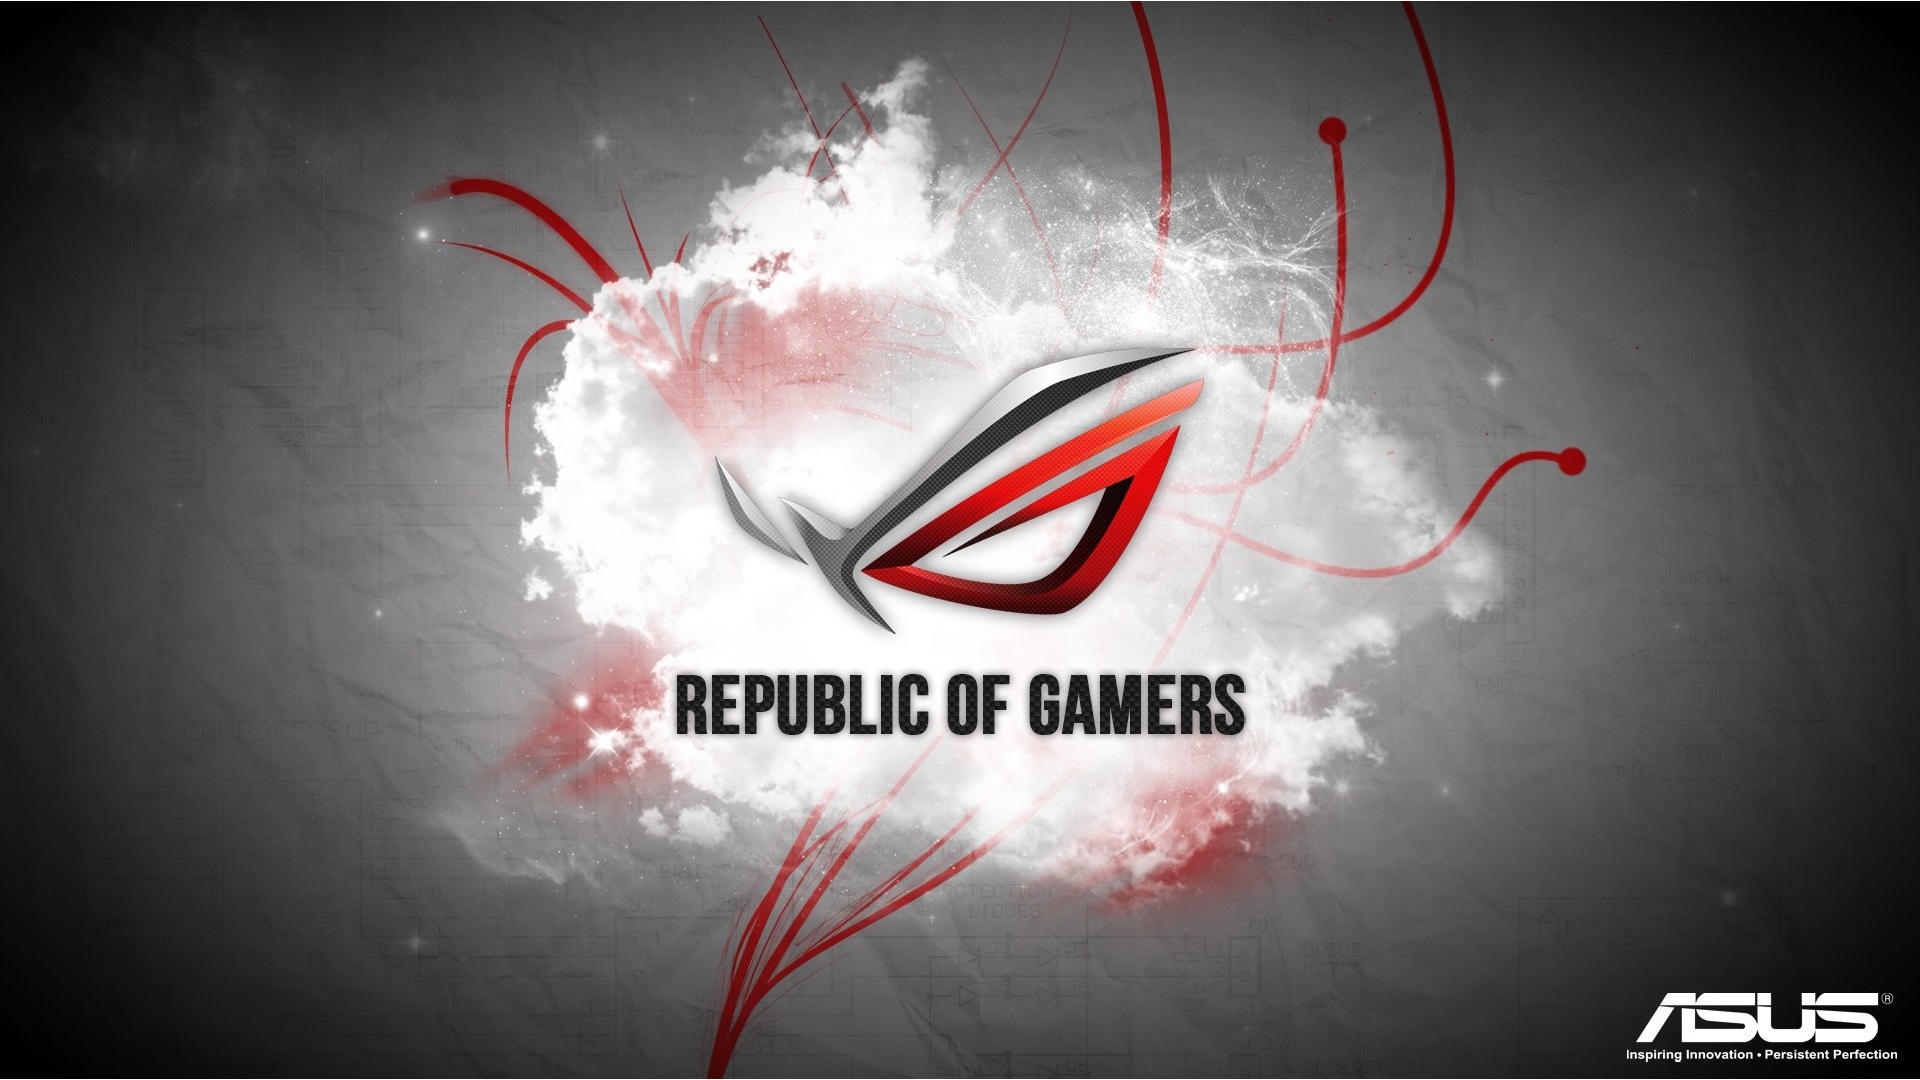 Red Asus Republic Of Gamers Wallpapers 1920x1080 399029